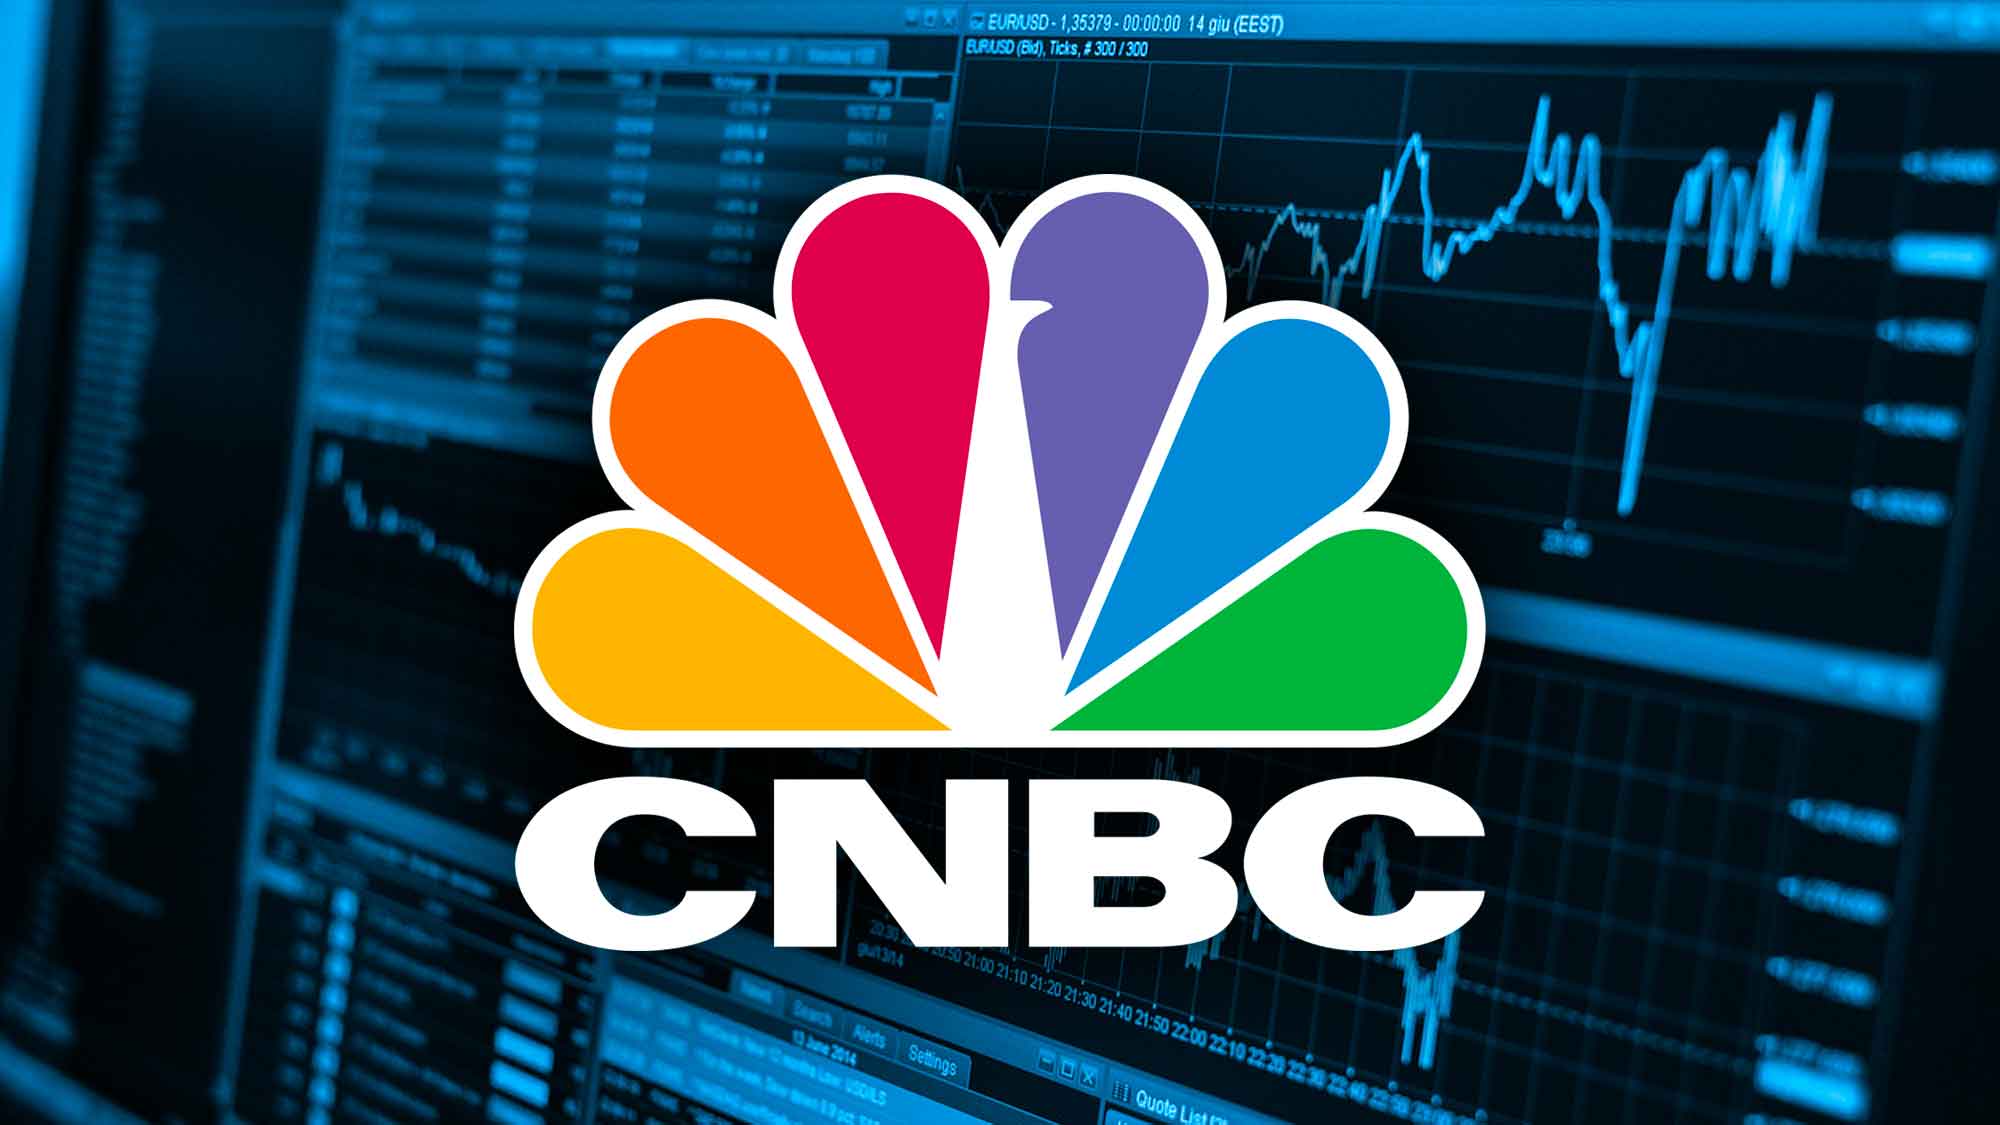 CNBC's Daytime Viewership Nearly Doubles During 2008 Recession